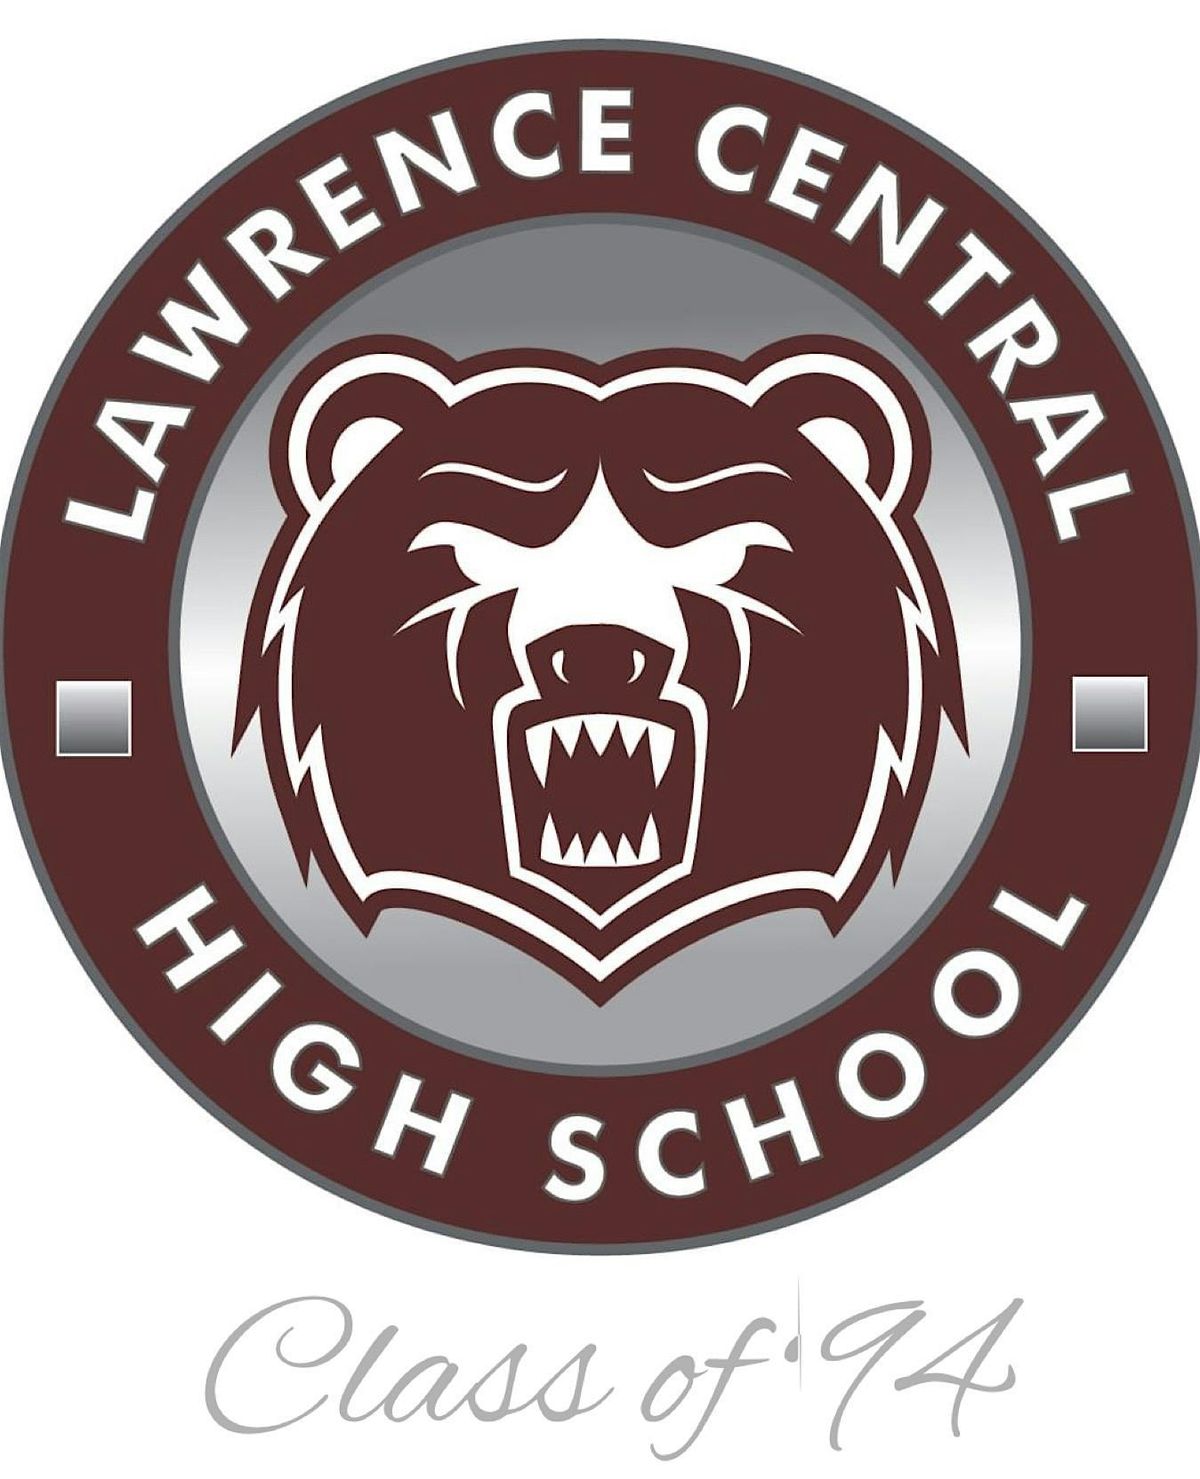 Lawrence Central HS Class of 94 Reunion